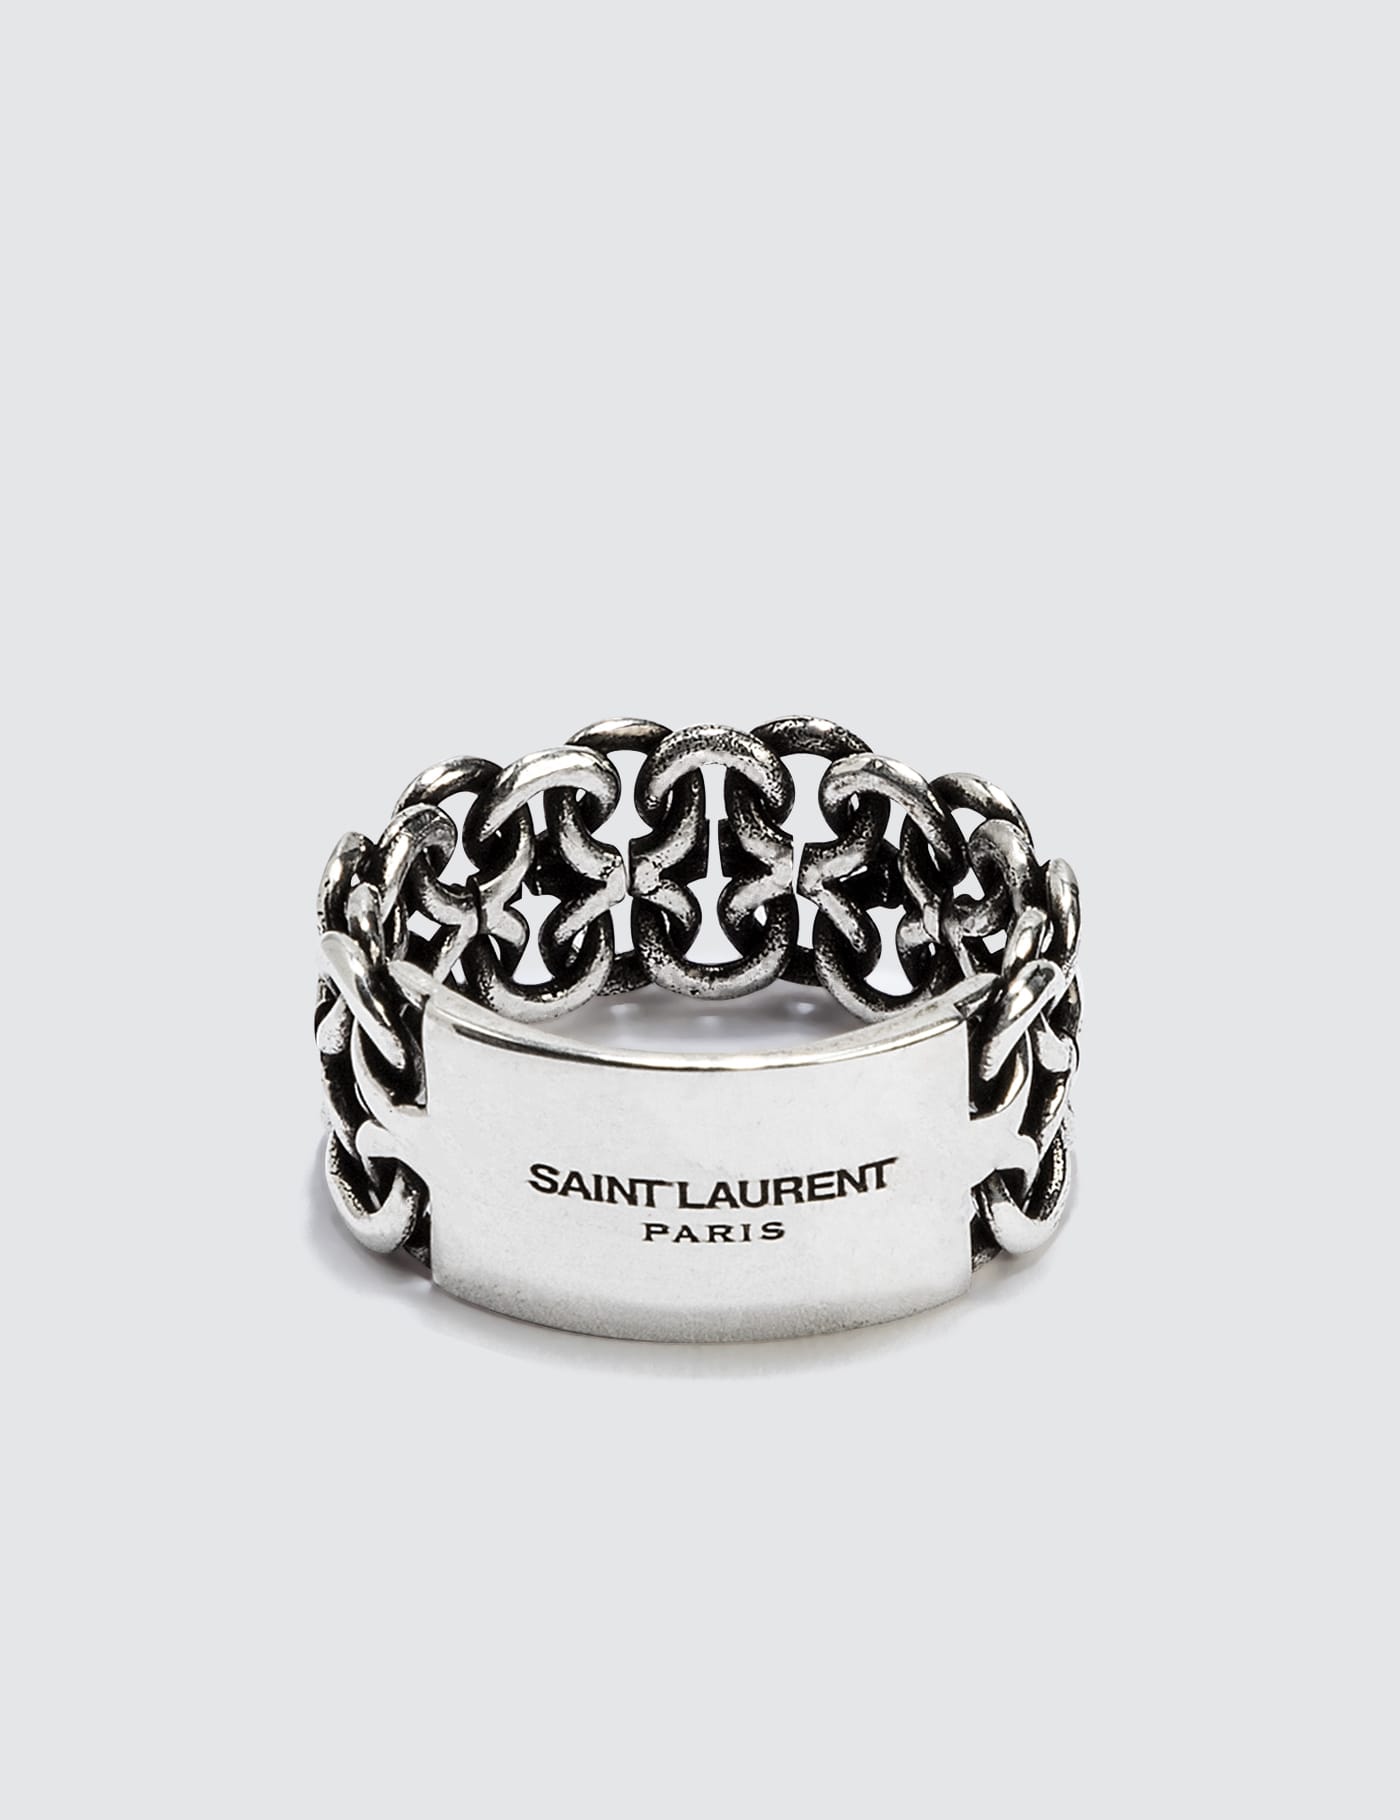 YVES SAINT LAURENT. Gold-plated metal ring adorned with … | Drouot.com